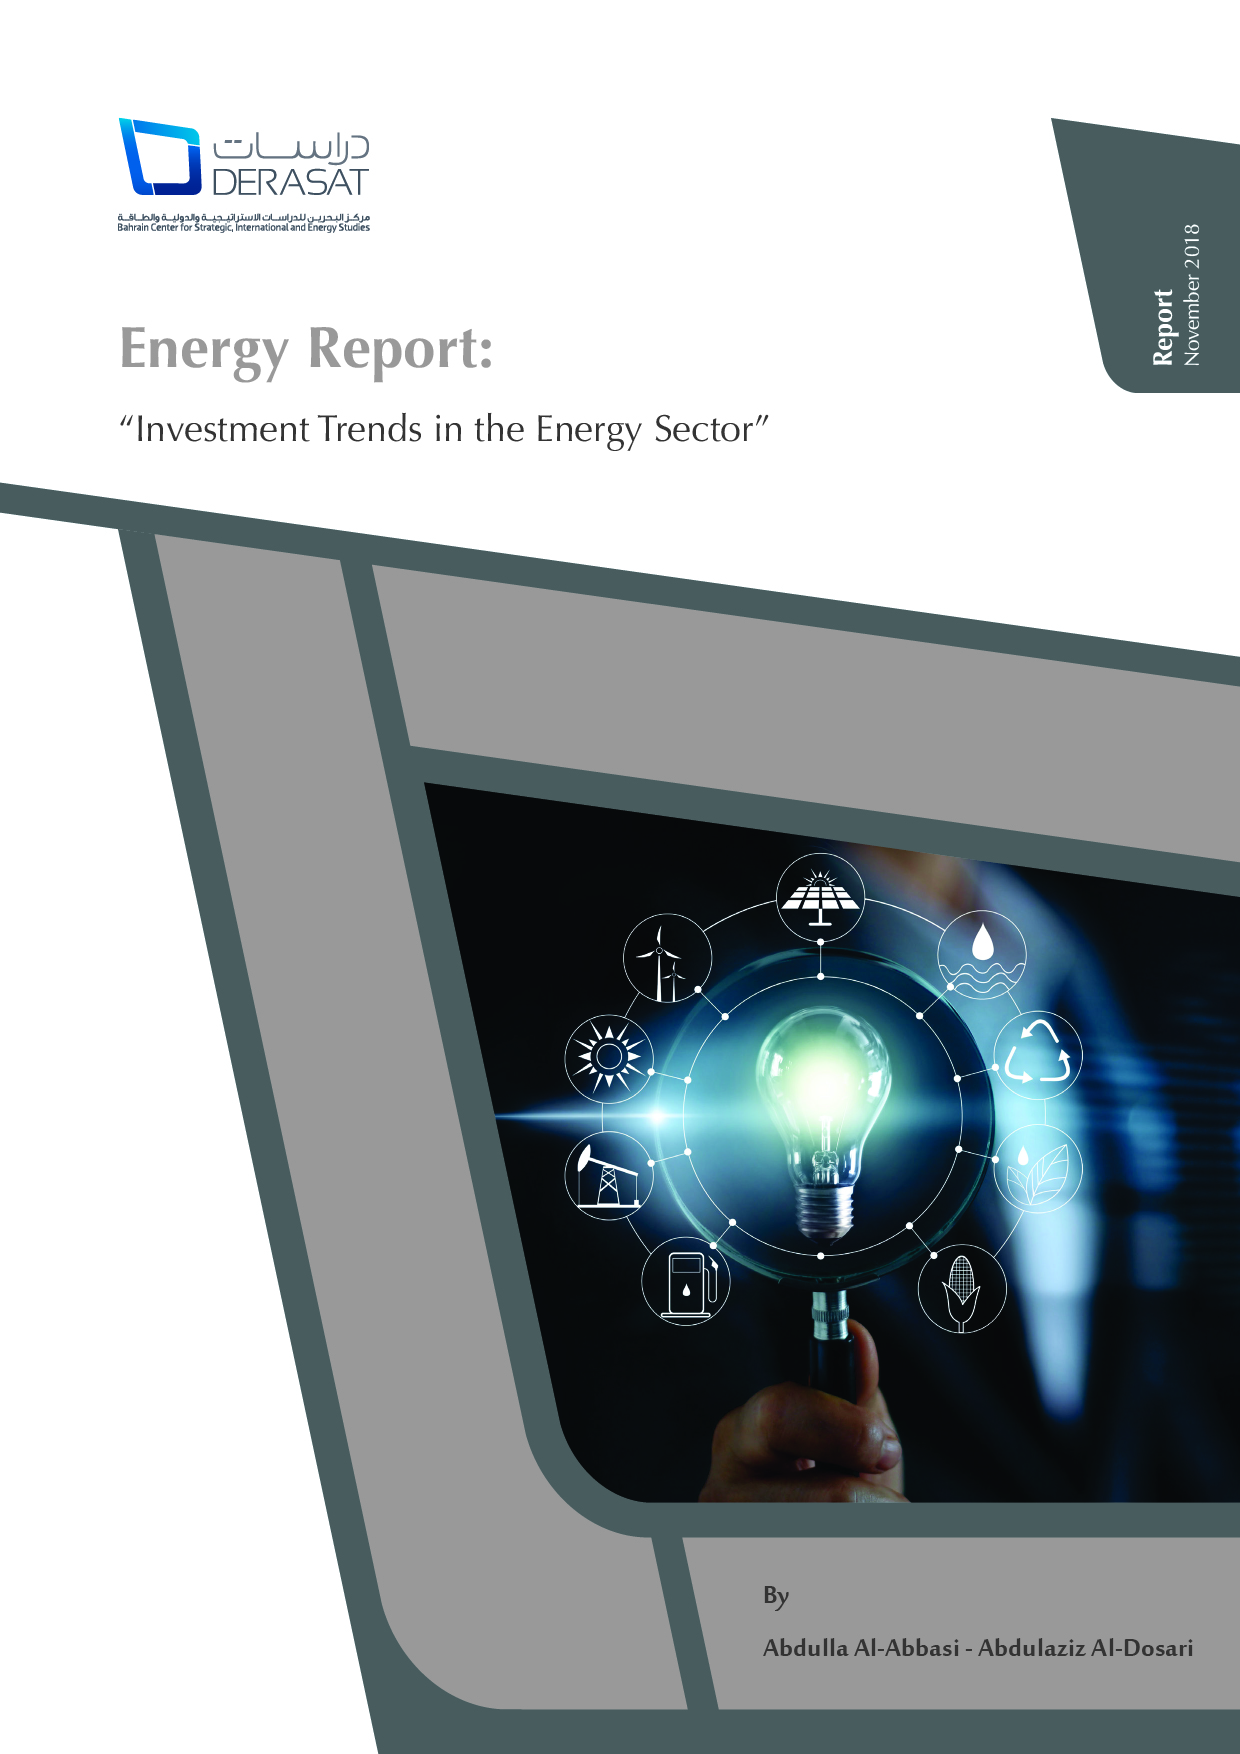 Investment Trends in the Energy Sector: Energy Report - 4/18